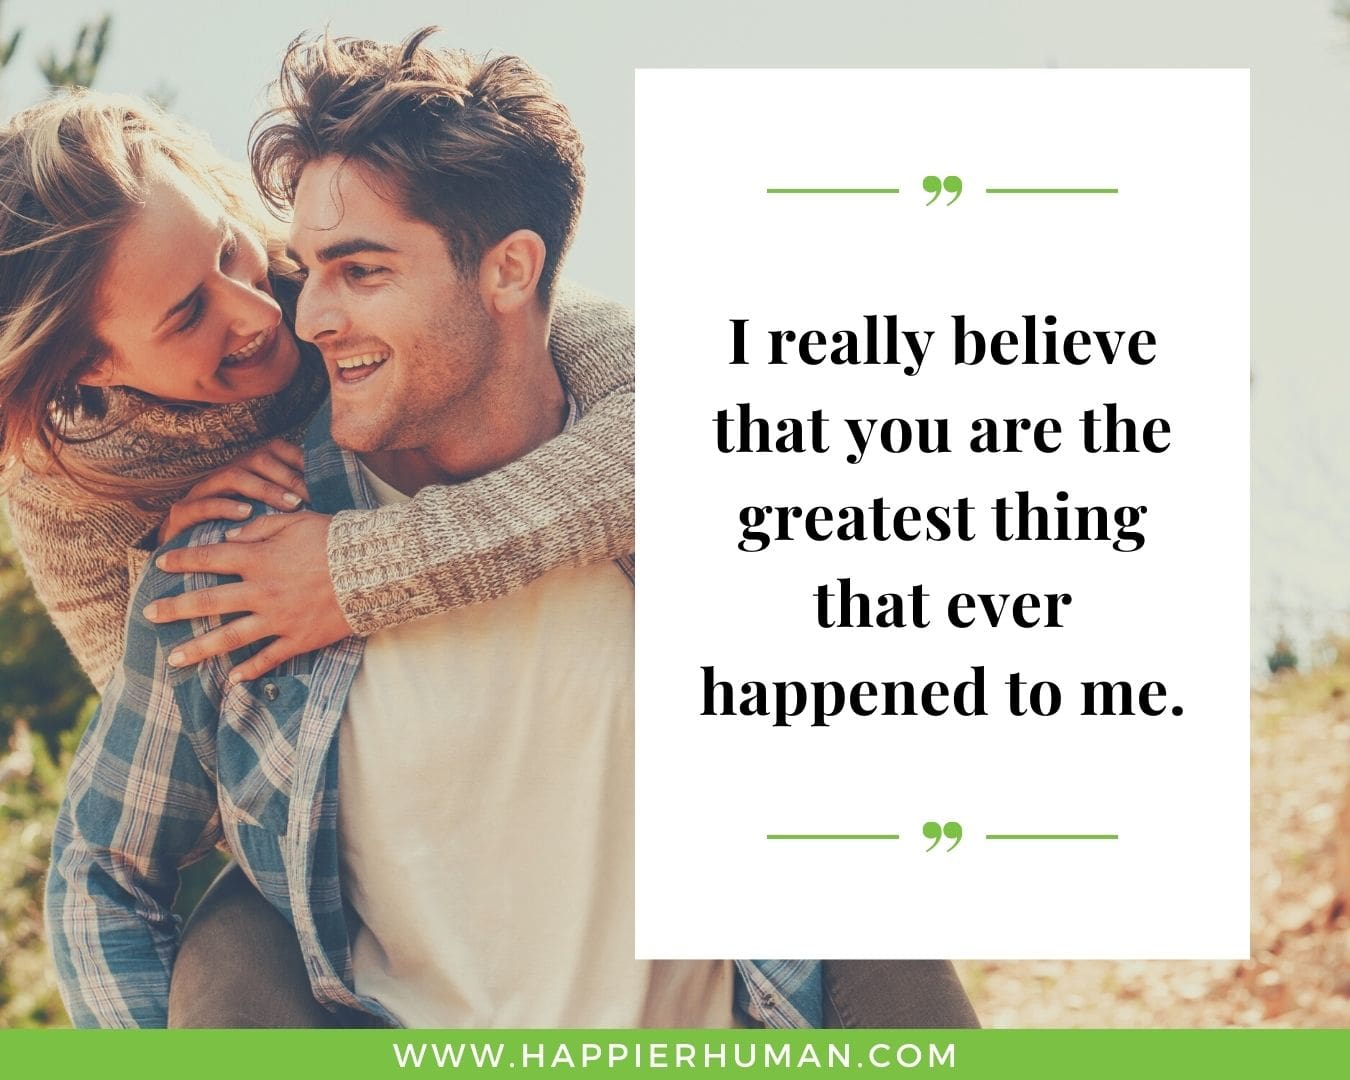 Deep quotes of love- “I really believe that you are the greatest thing that ever happened to me.”